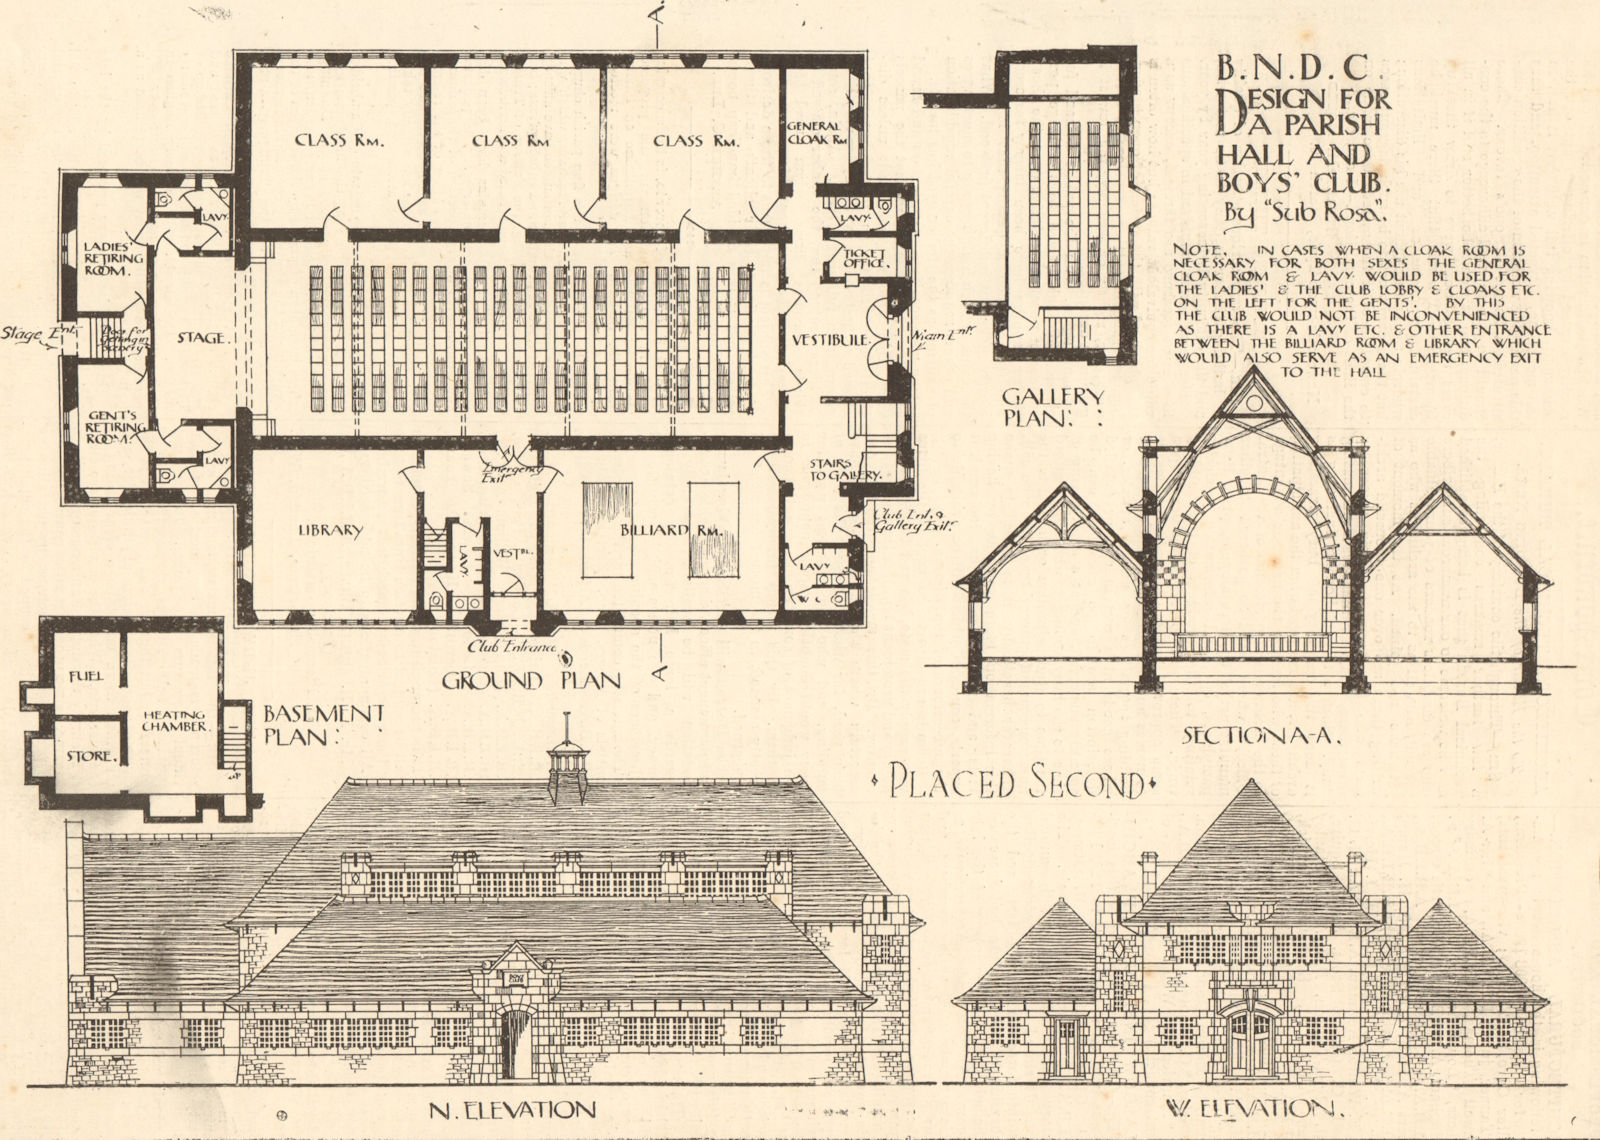 Associate Product Parish Hall & boys' club design by Sub Rosa. Plans, elevations, section 1908